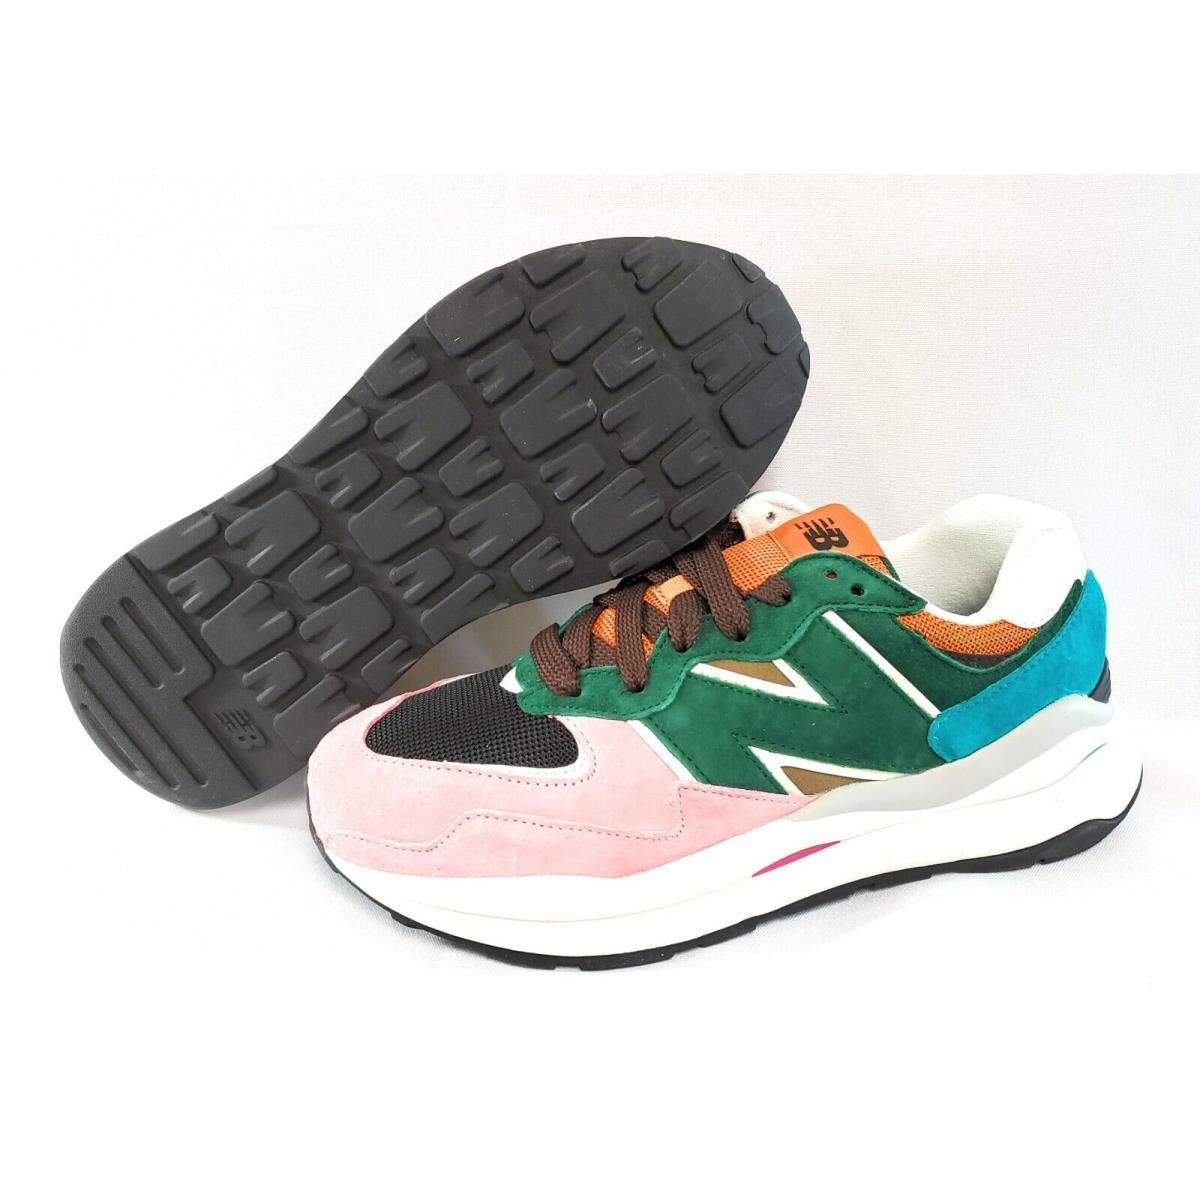 Mens New Balance 5740 FM1 Pink Multicolor Suede Sneakers Shoes